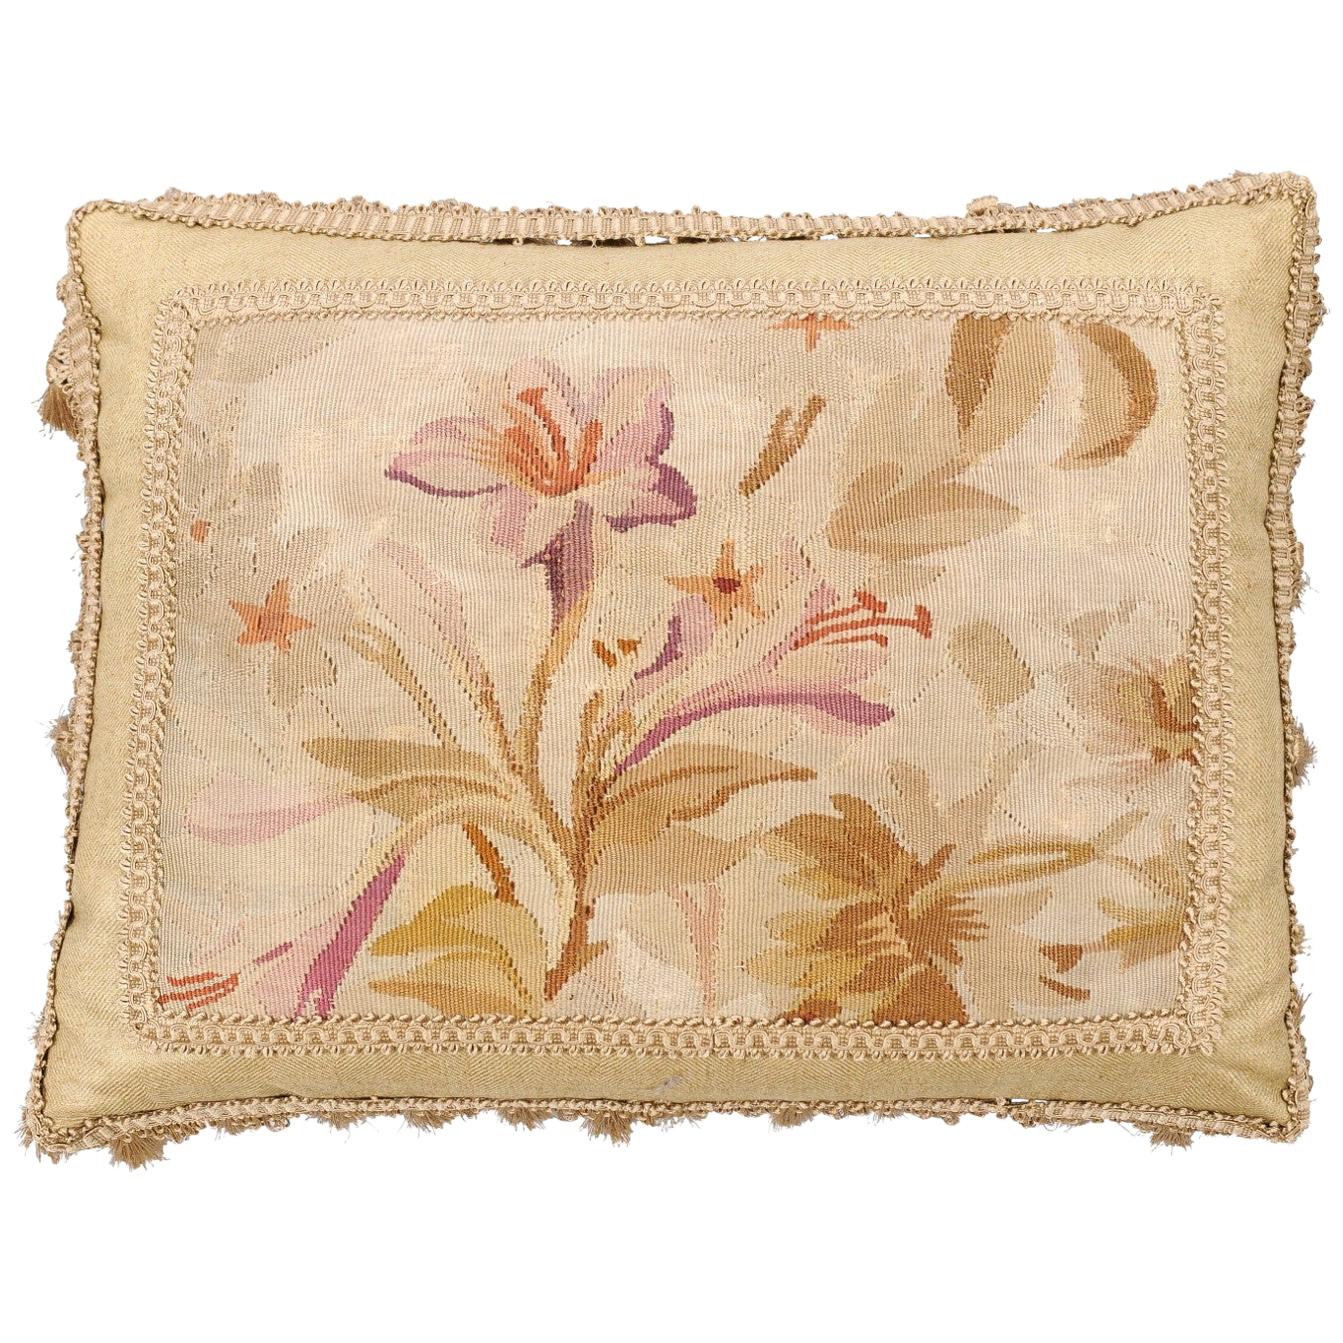 19th Century French Floral Themed Aubusson Tapestry Pillow with Tassels